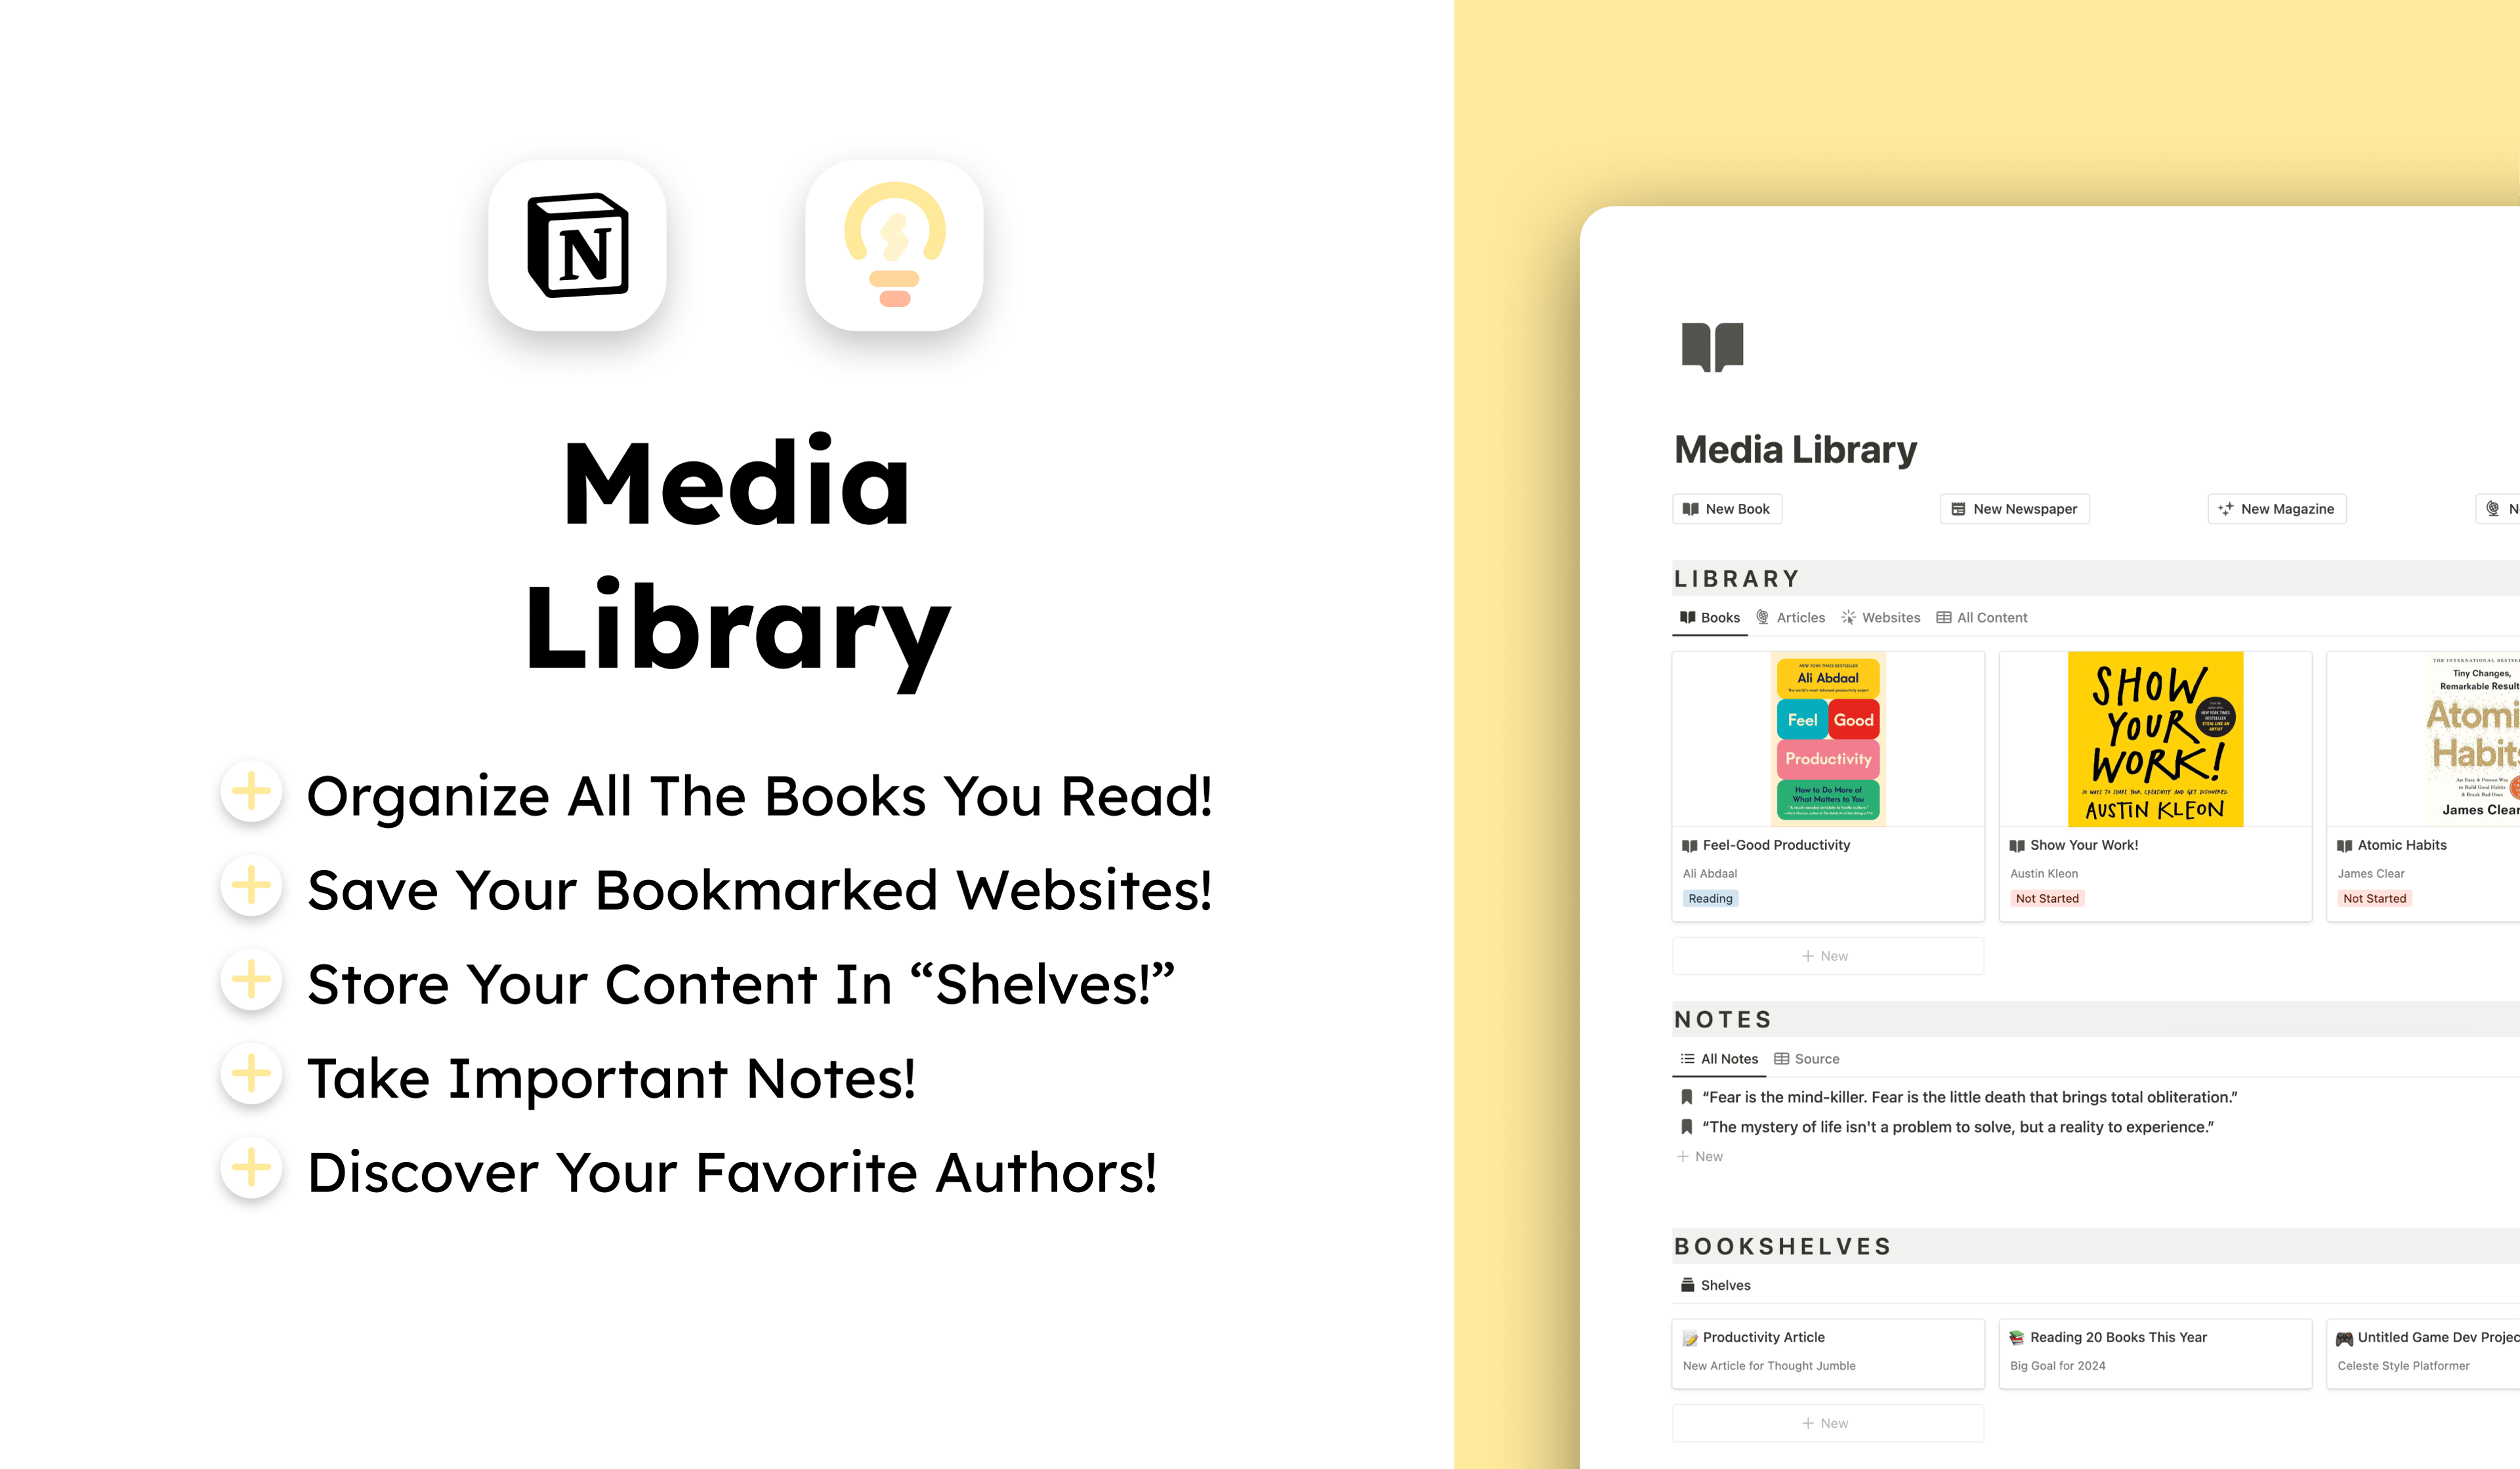 With this template, you can:
⭐️ Organize Your Reading With Ease!
⭐️ Save Bookmarks And Take Notes!
⭐️ Categorize Everything Into 'Shelves!'
⭐️ Discover Your Favorite Authors!